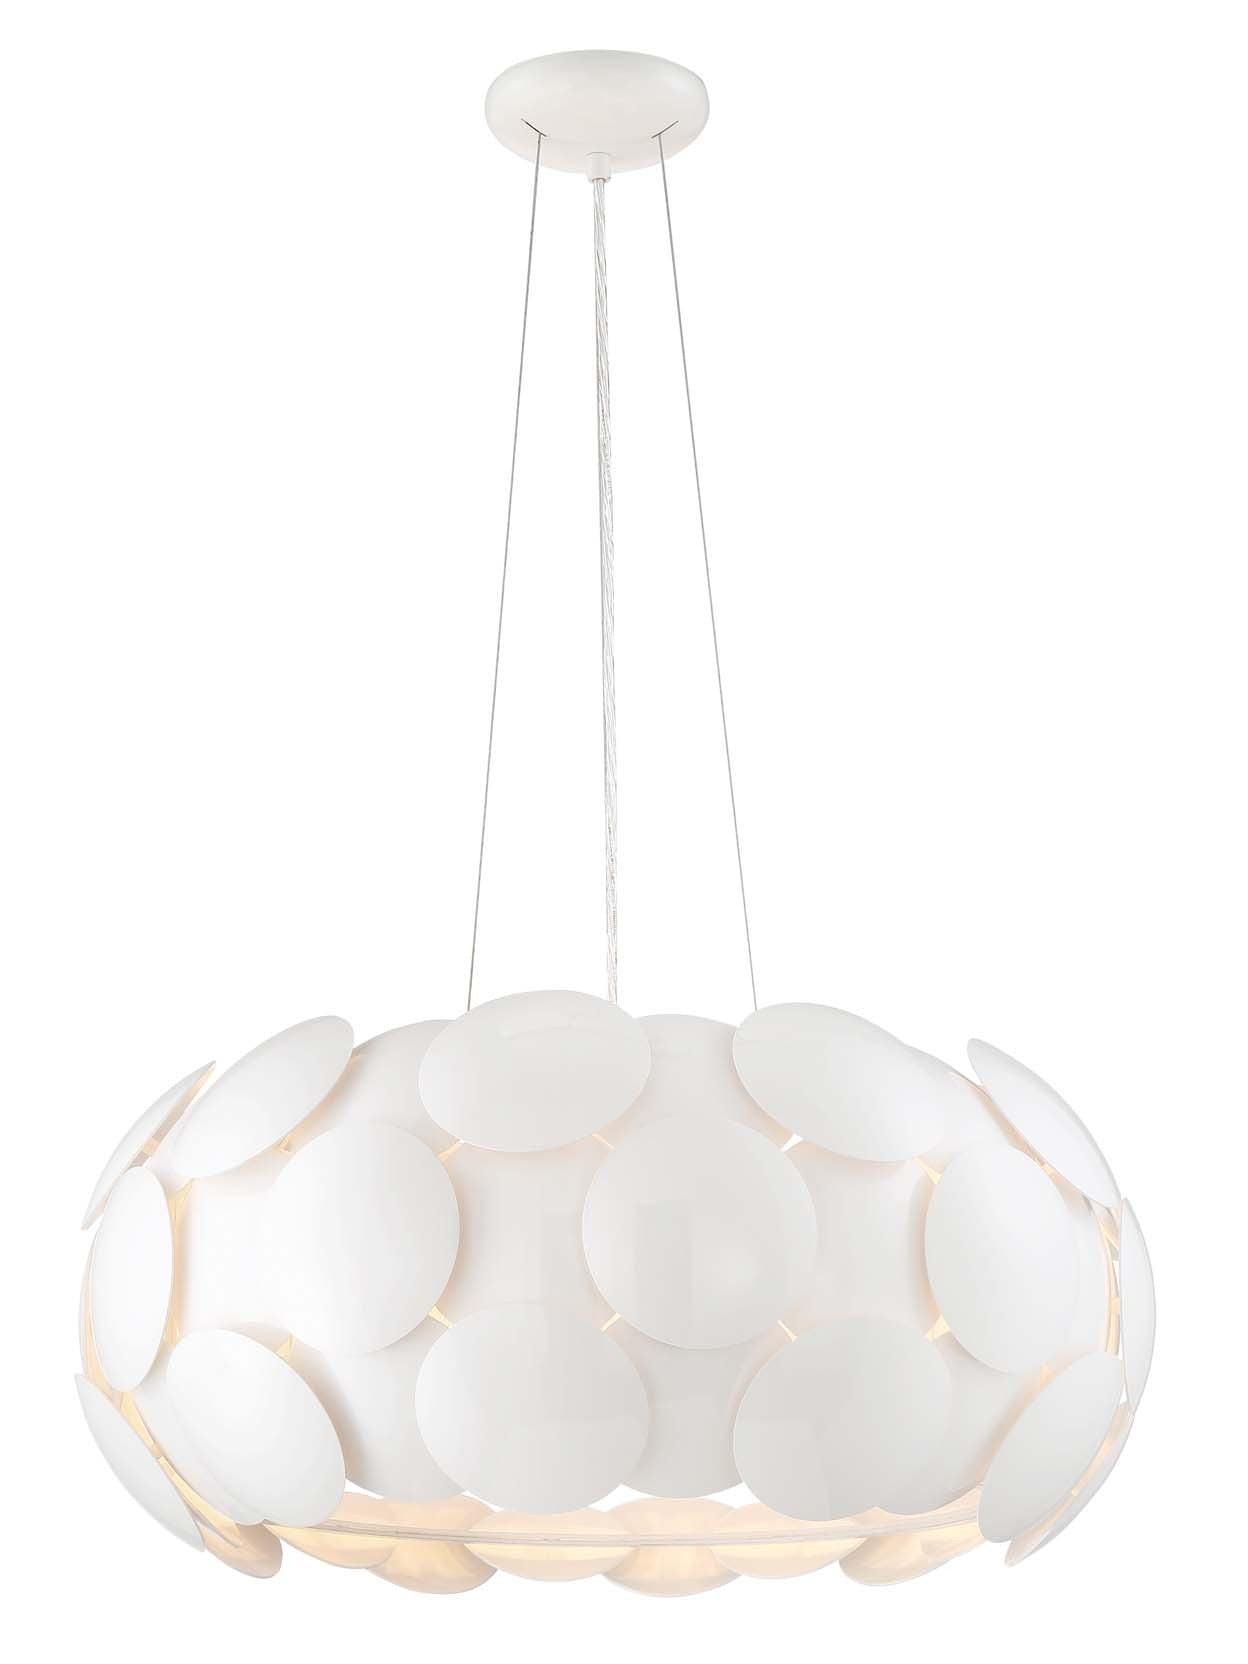 Zeev Crown 6 bulb Contemporary Gloss White Chandelier with Crystal